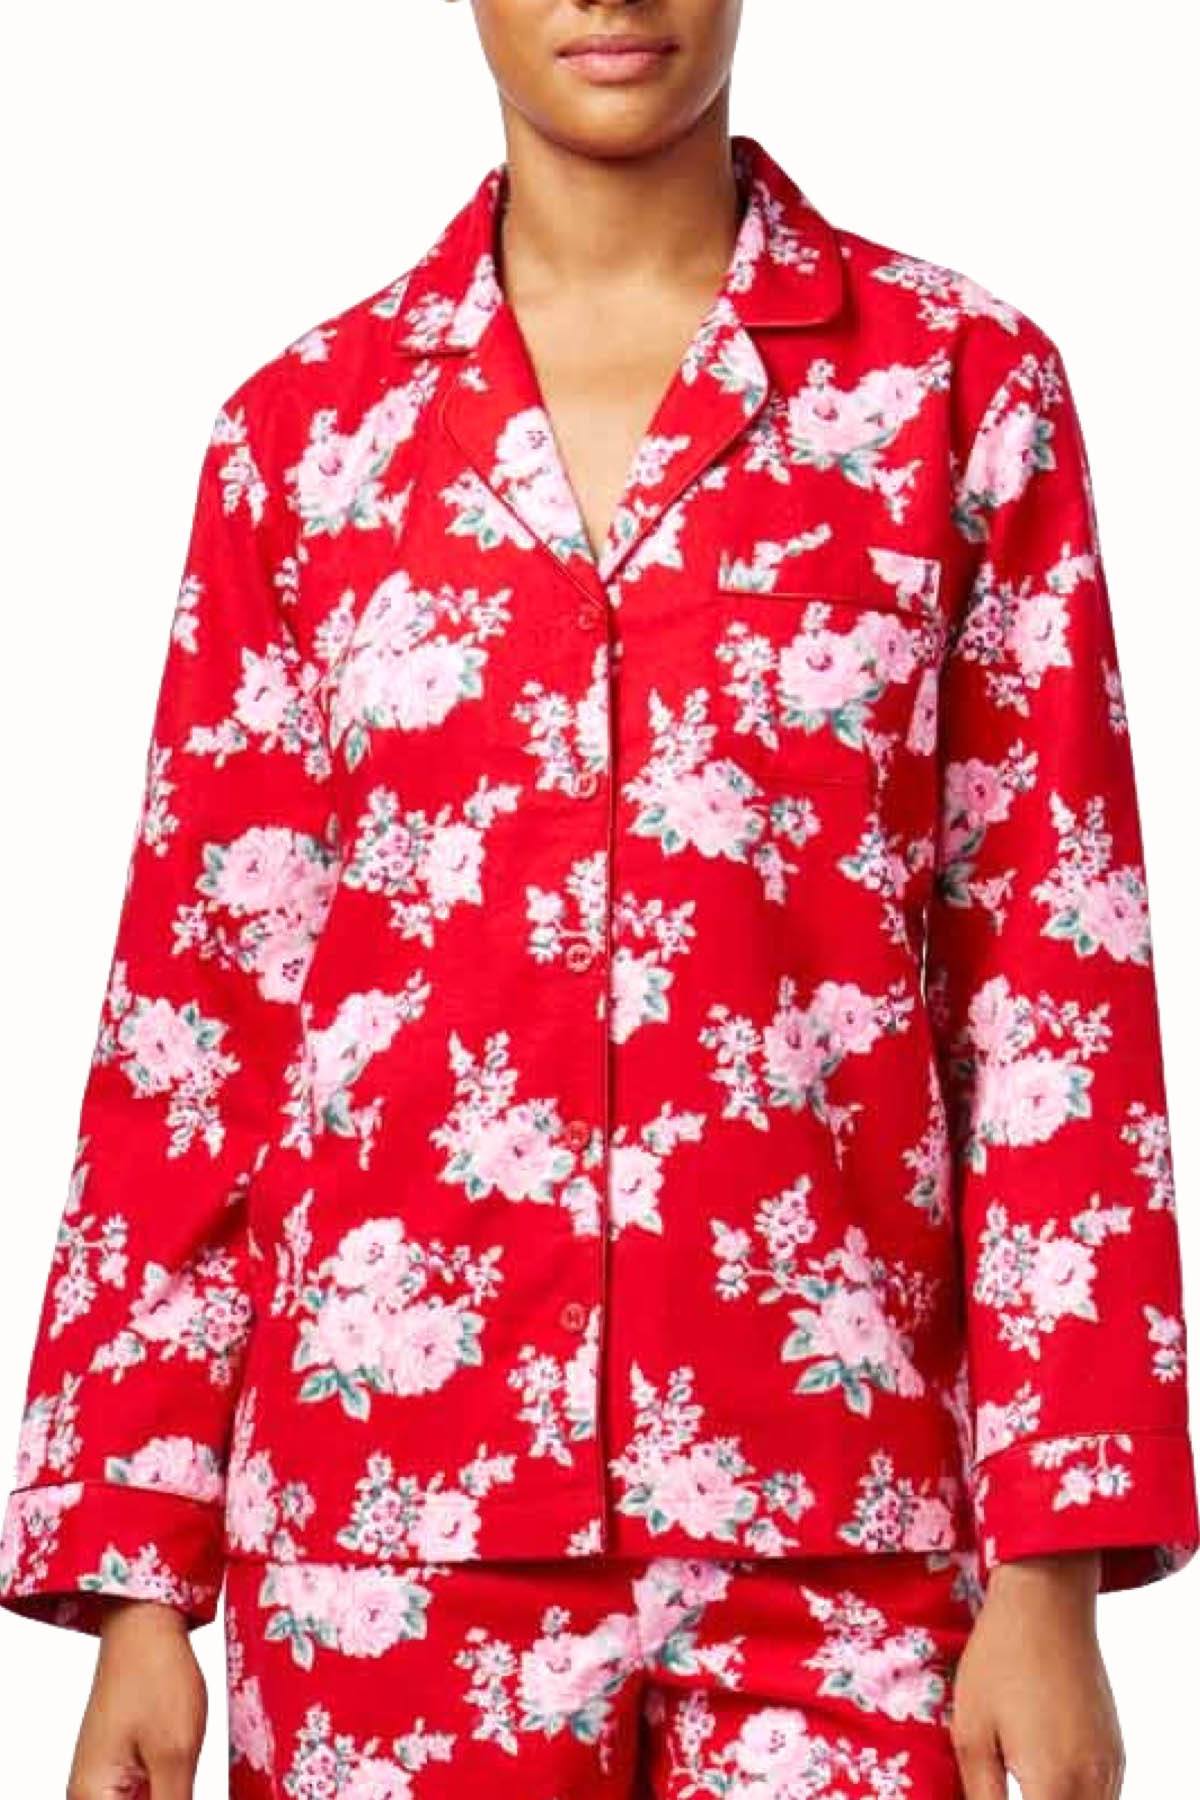 Charter Club Intimates Red/Pink Rose Printed Flannel PJ 2Piece Set